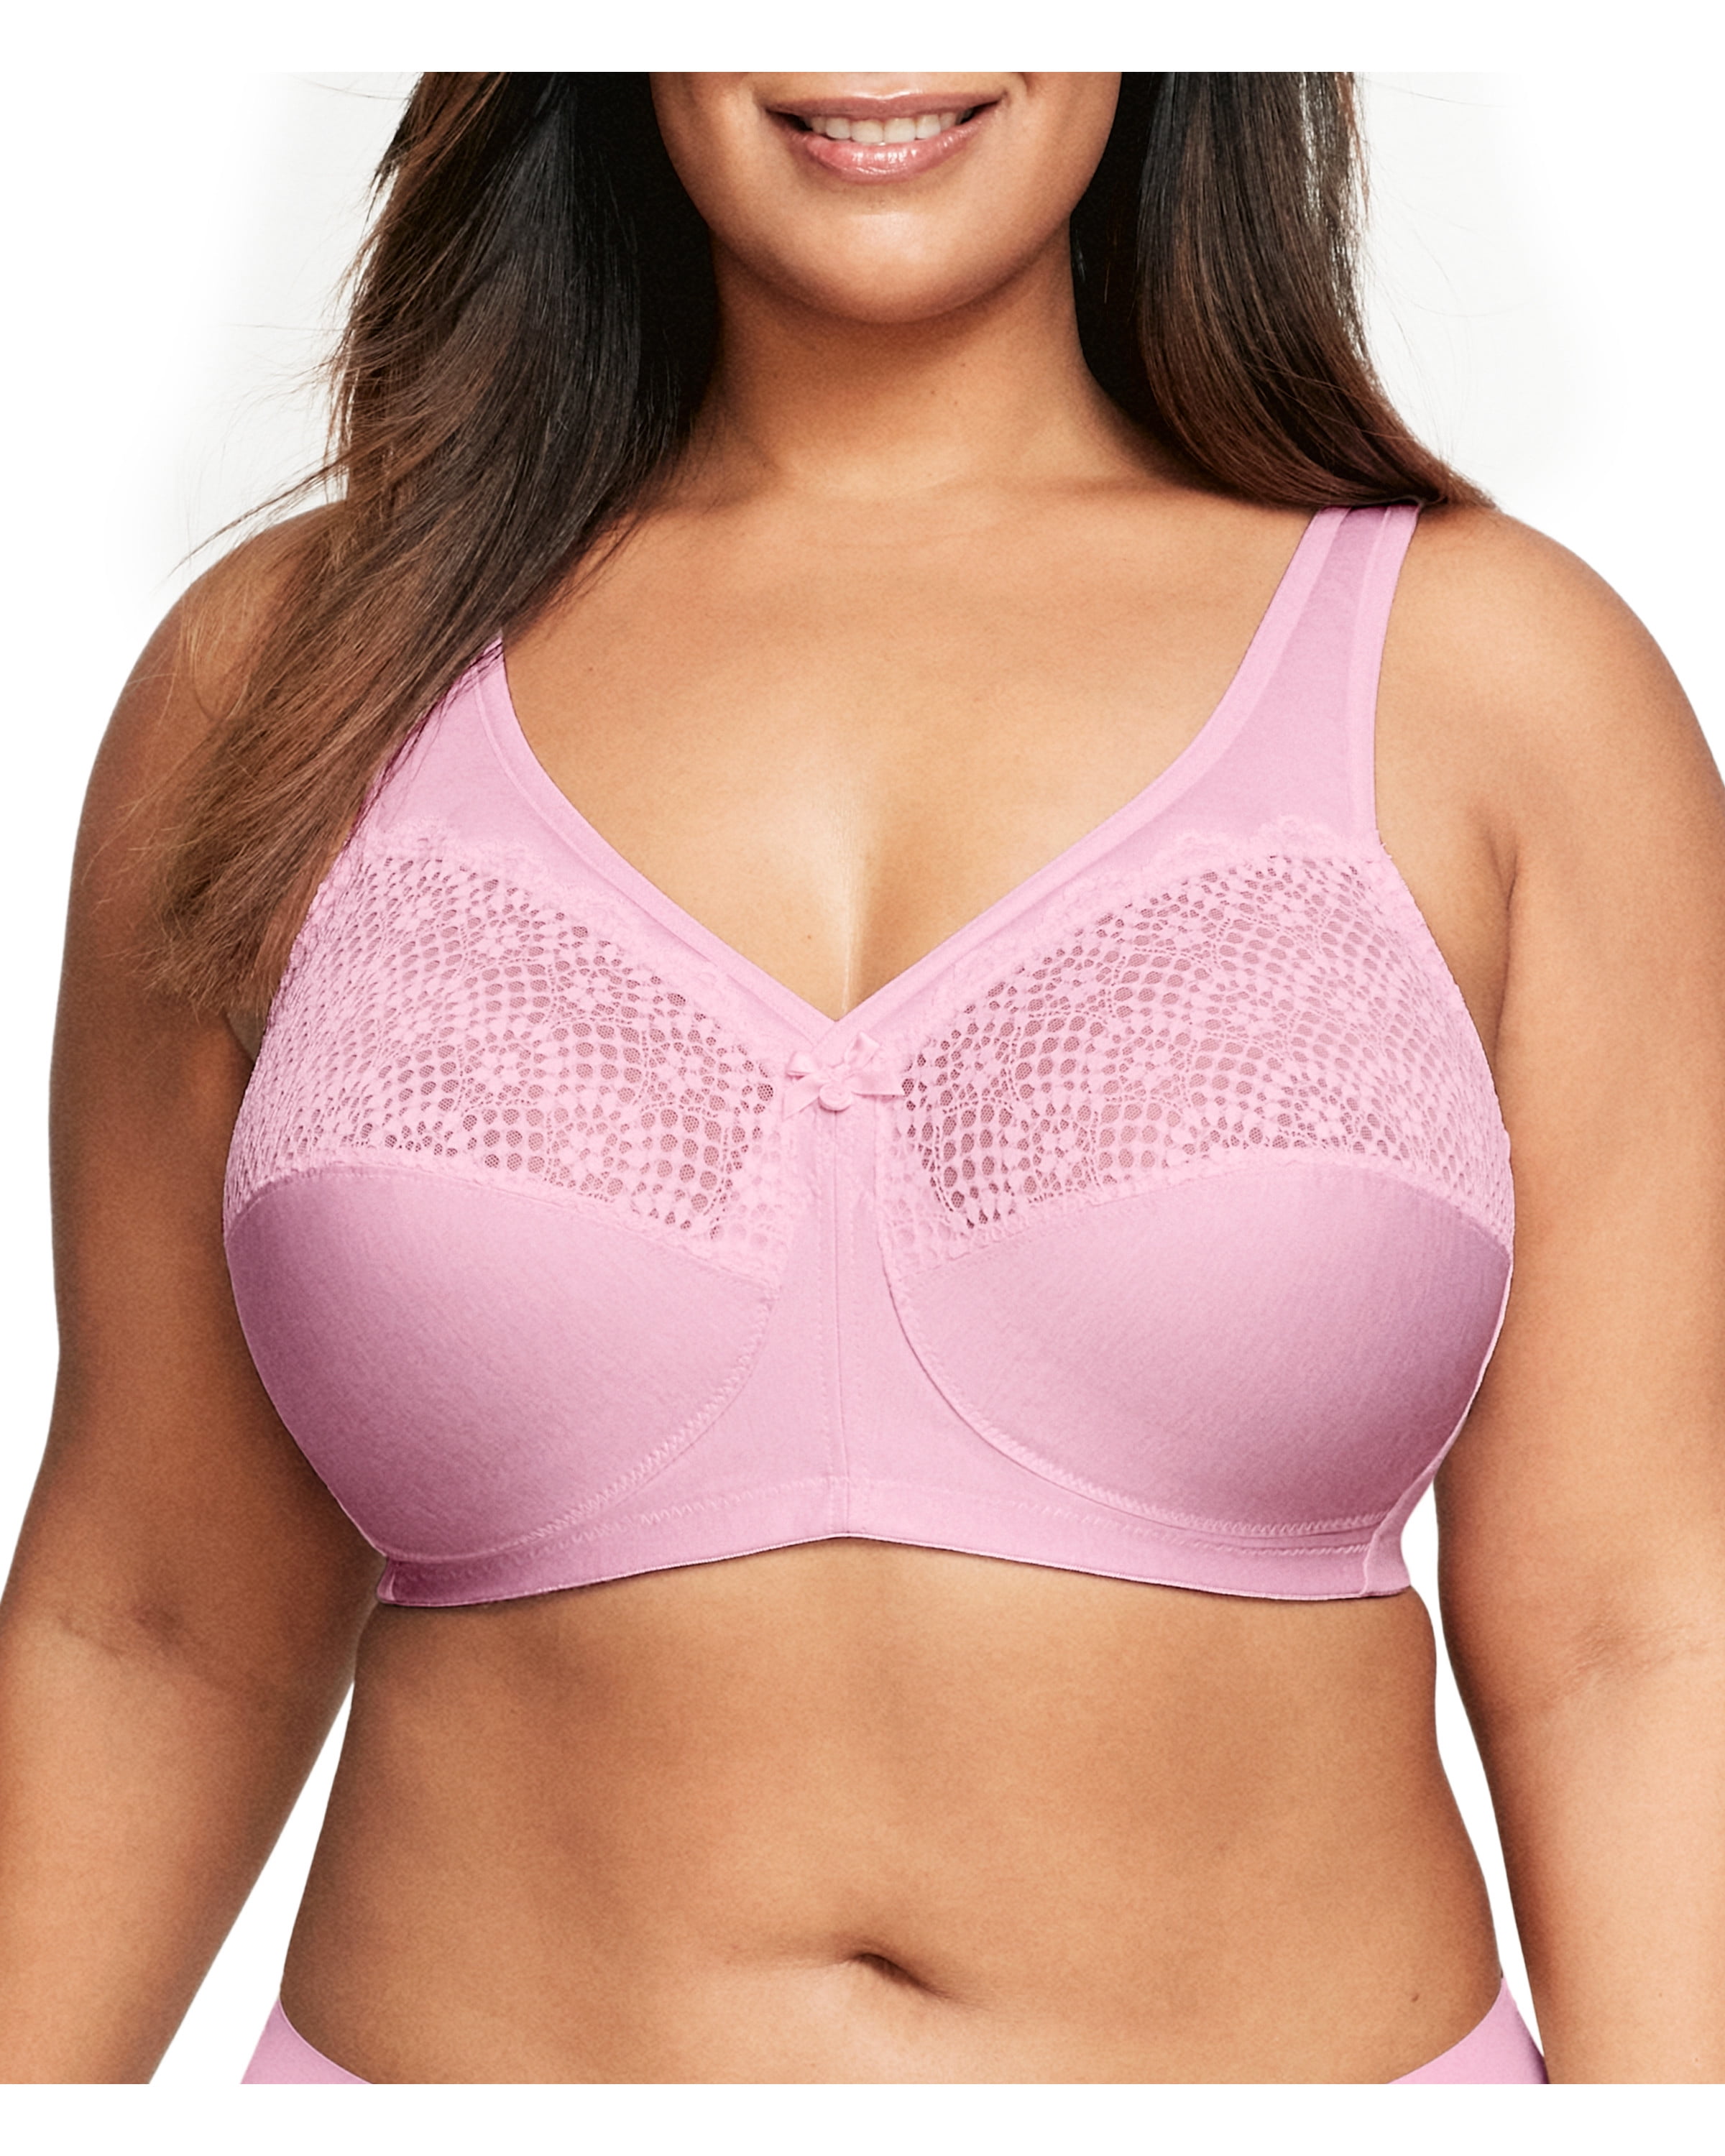 FORLEST Jelly Gel Mabel Plus No-Wire Supportive Minimizer Bra for